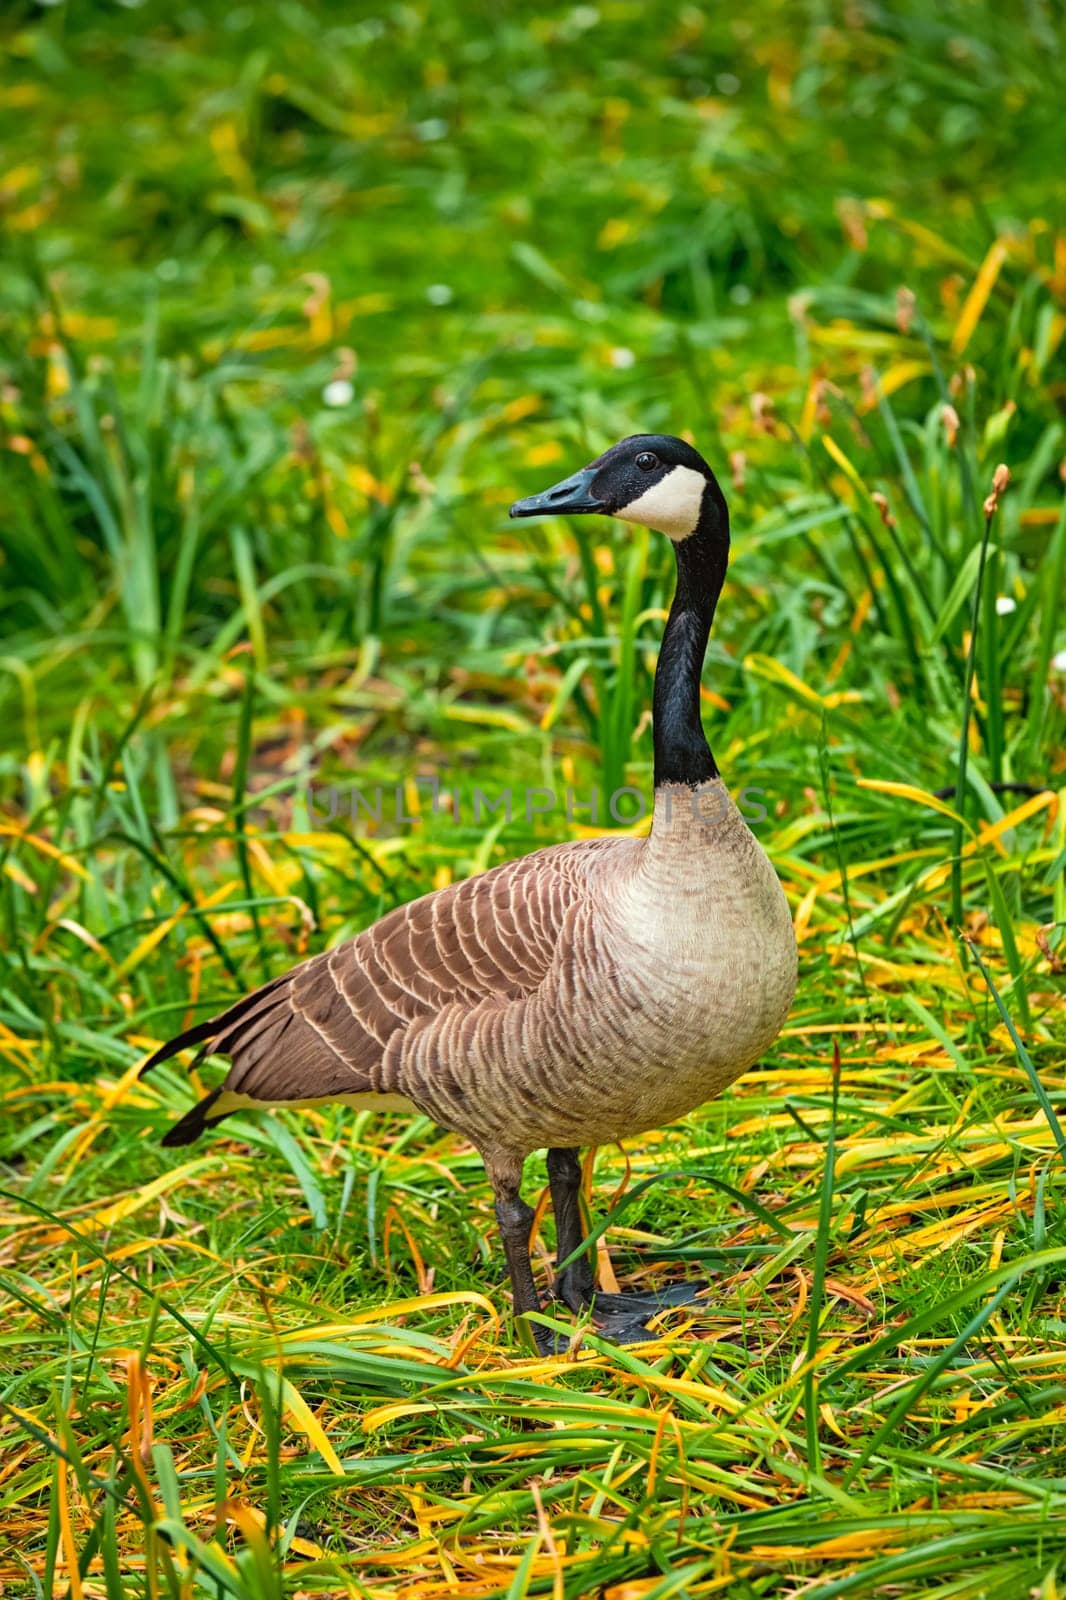 Canada goose on green grass close up